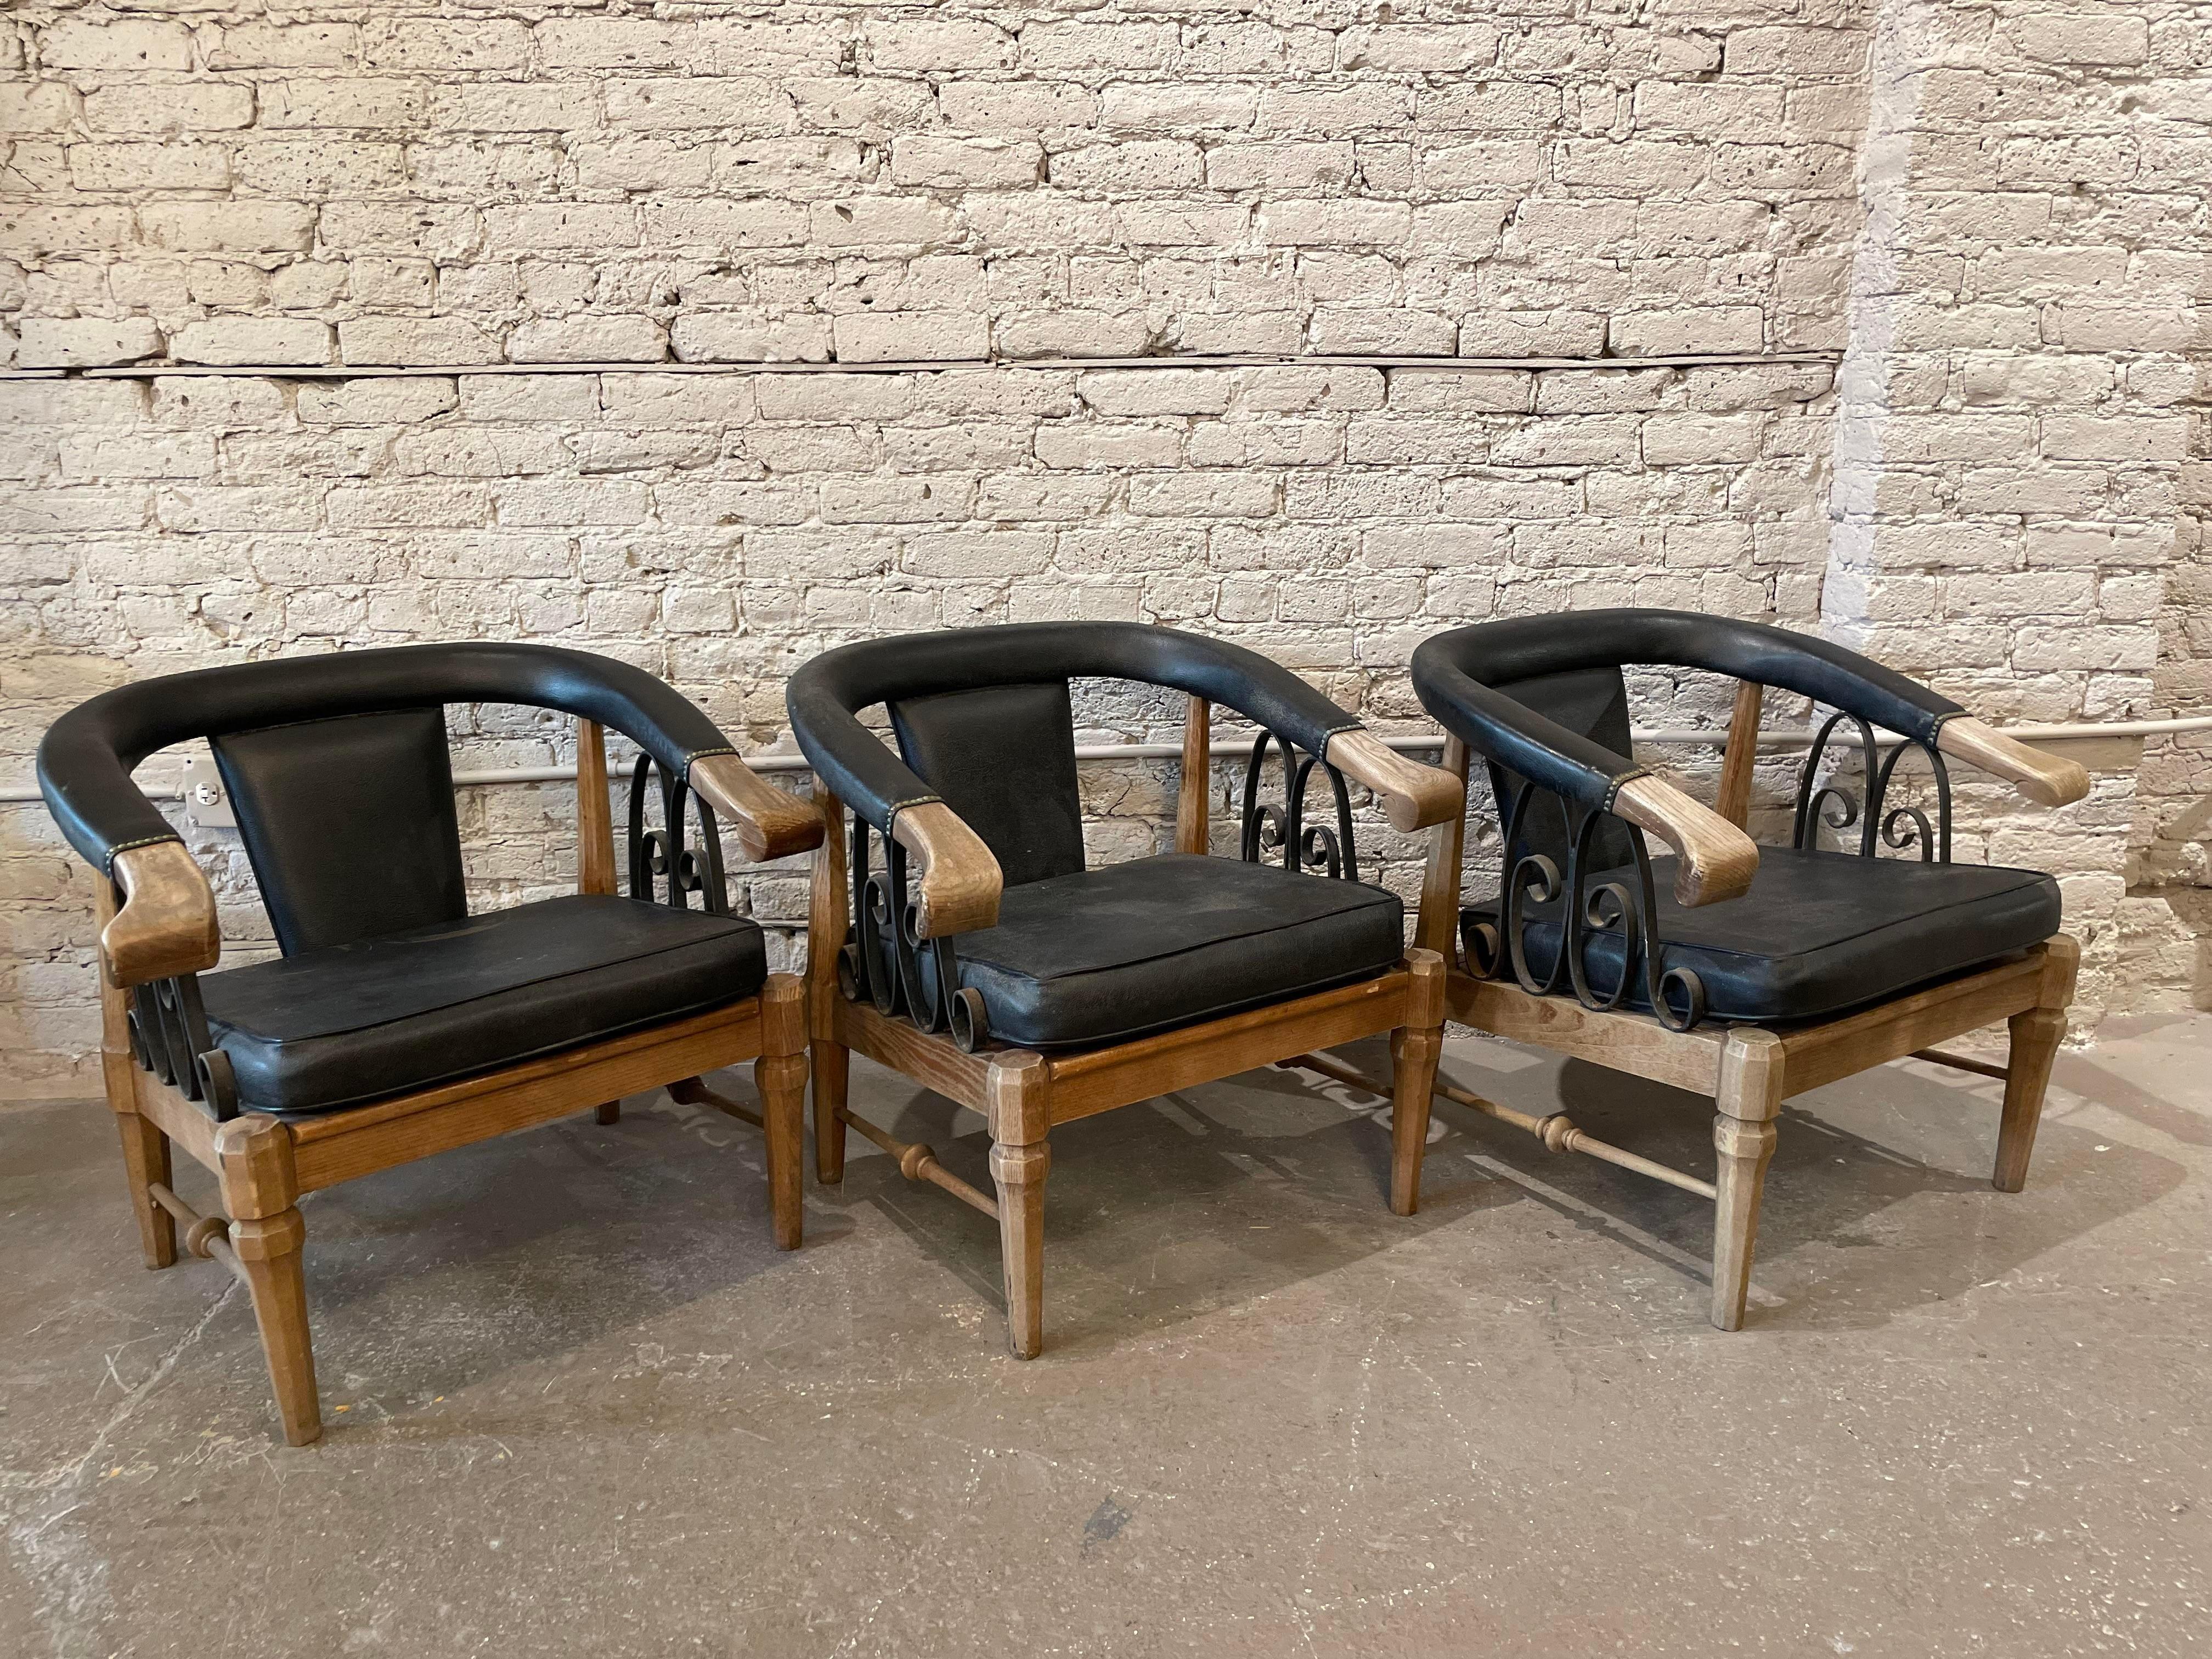 Leather 1980s Vintage Horseshoe Chairs - Set of 3 For Sale